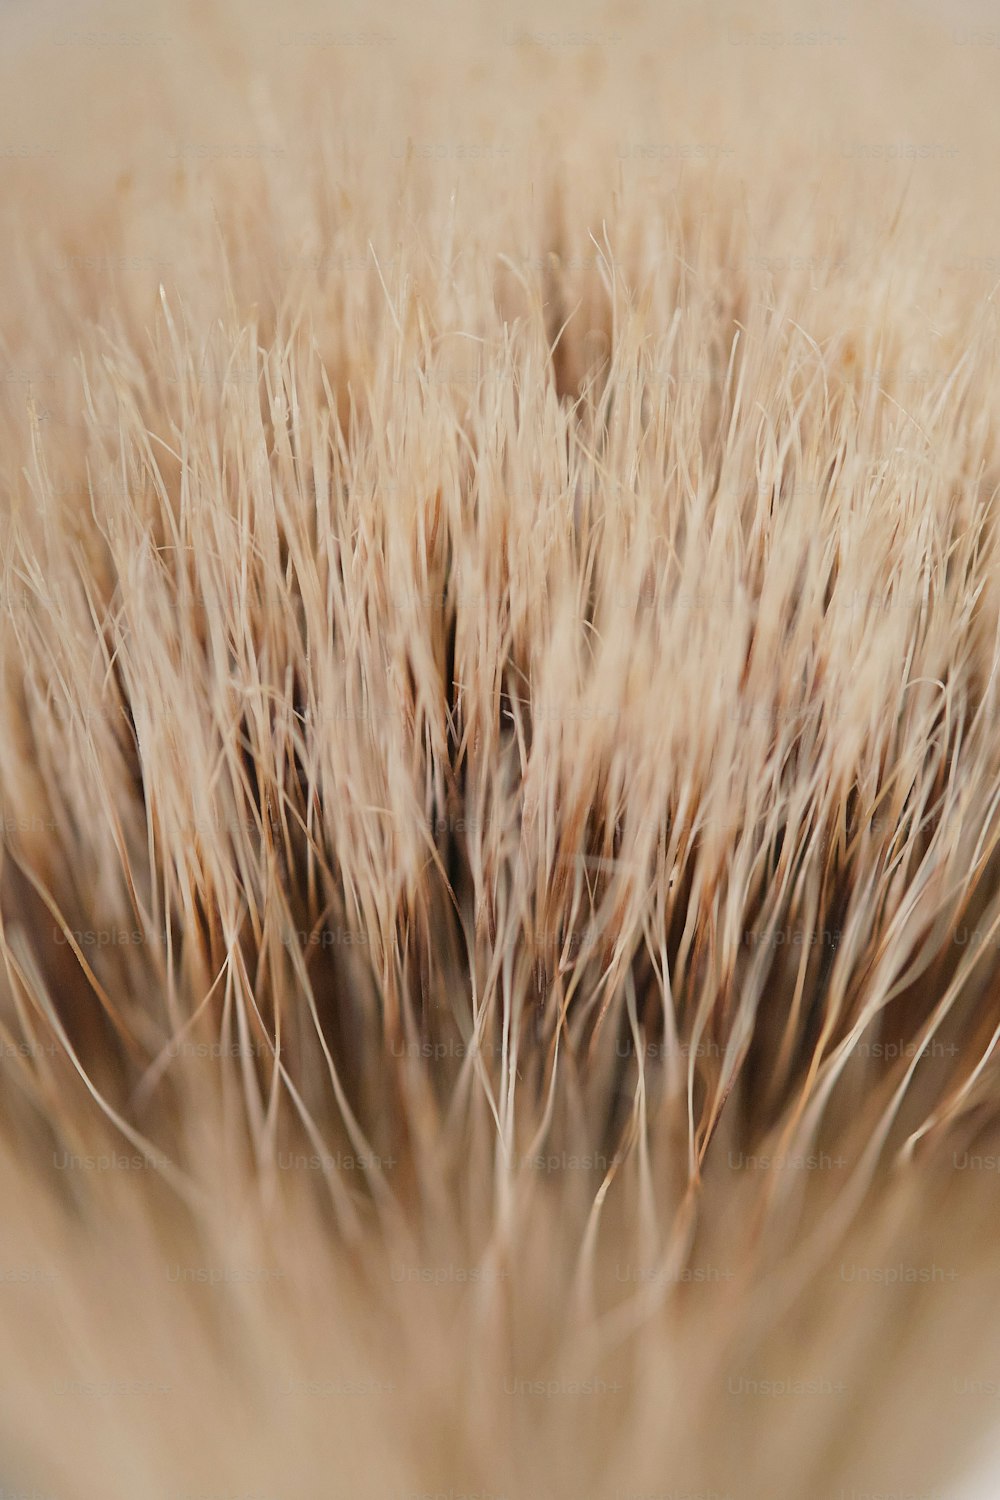 a close up view of a hair brush